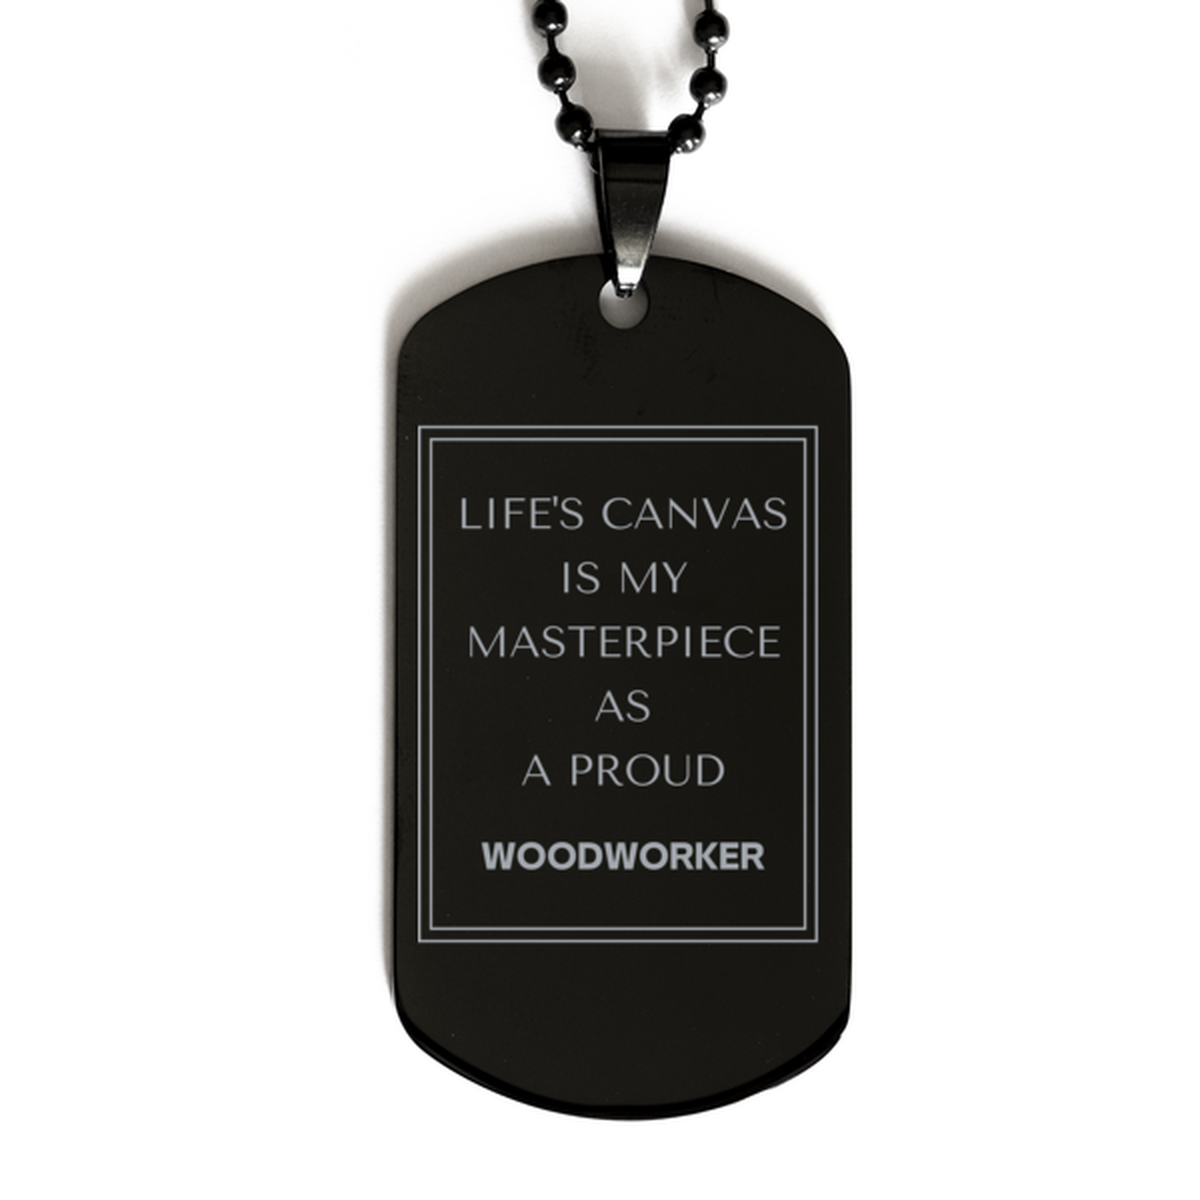 Proud Woodworker Gifts, Life's canvas is my masterpiece, Epic Birthday Christmas Unique Black Dog Tag For Woodworker, Coworkers, Men, Women, Friends